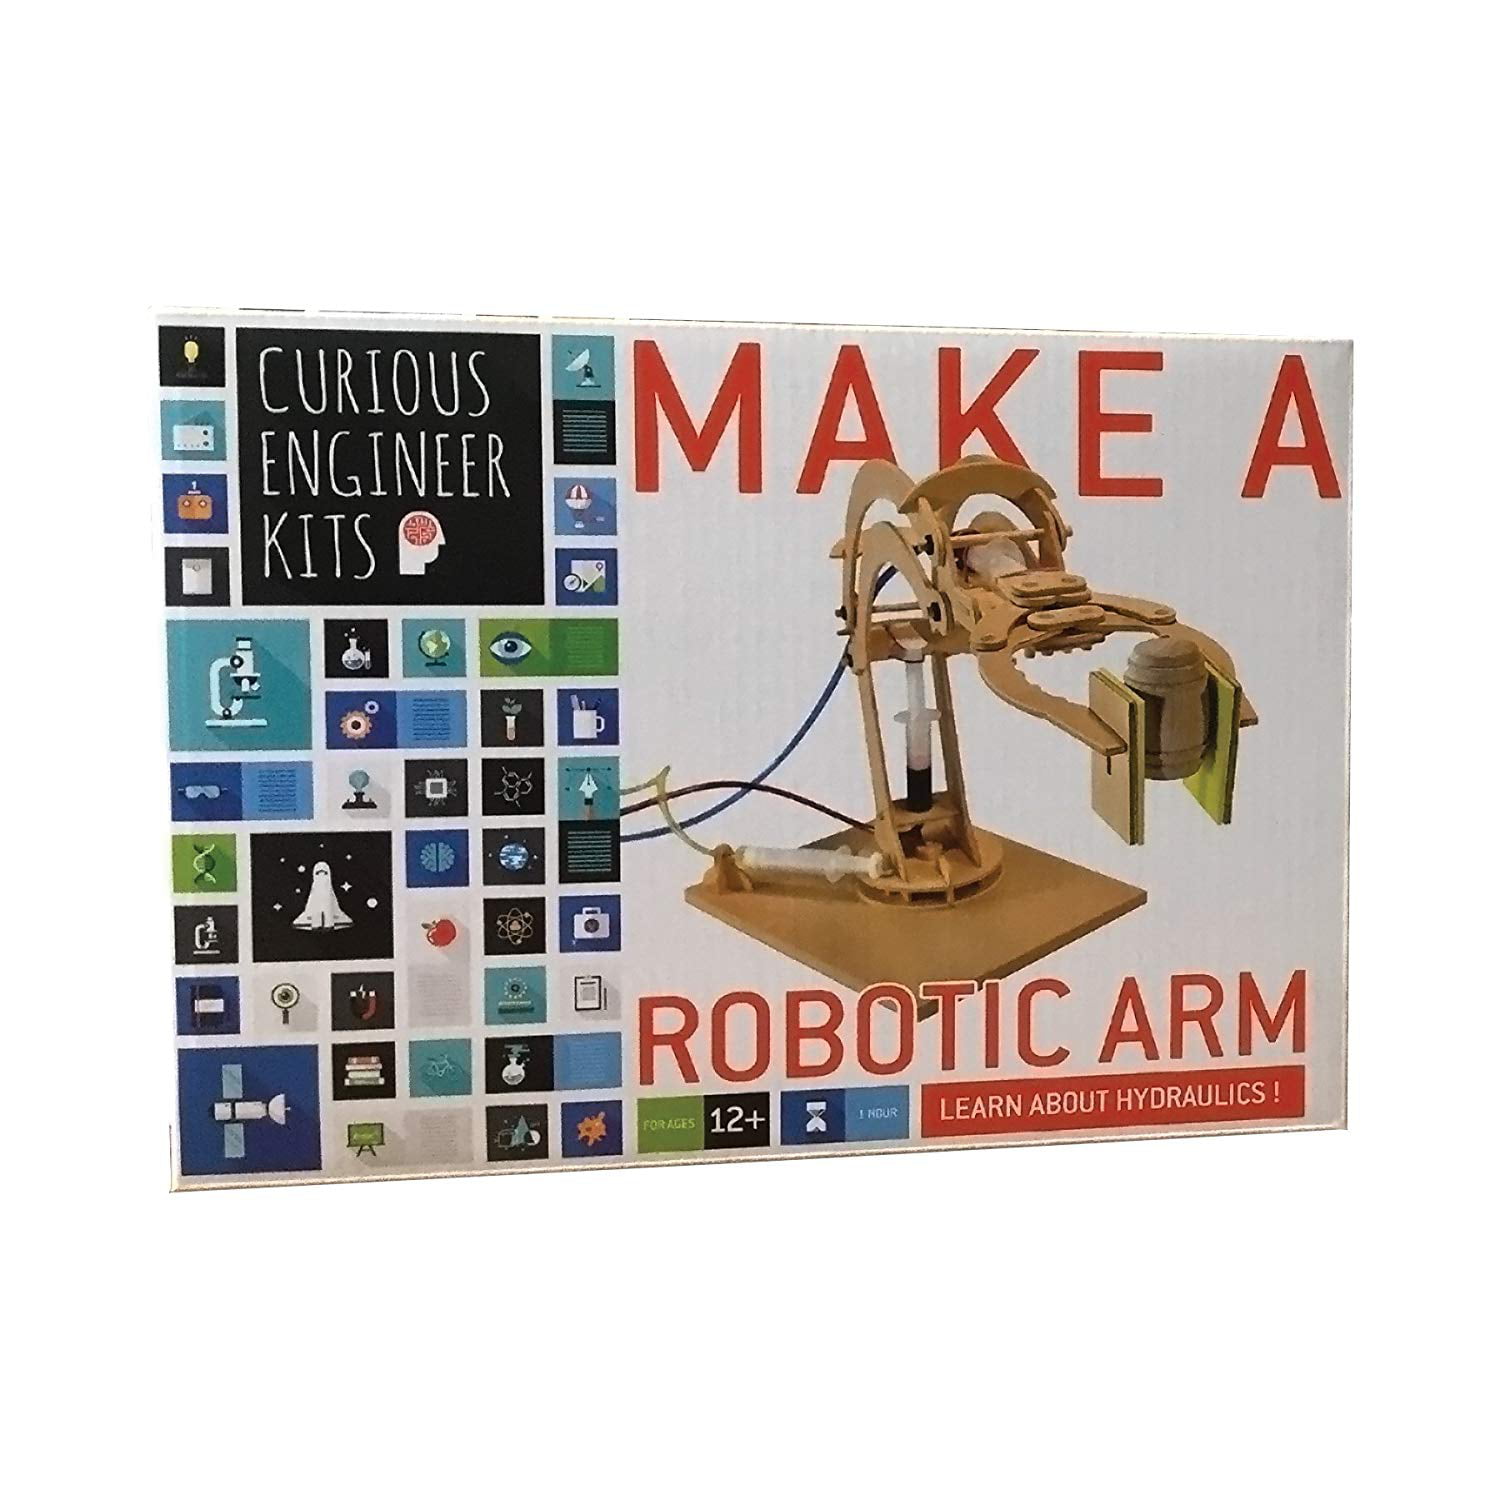 Make a Robotic Arm by Copernicus Toys for sale online Curious Engineer Kits